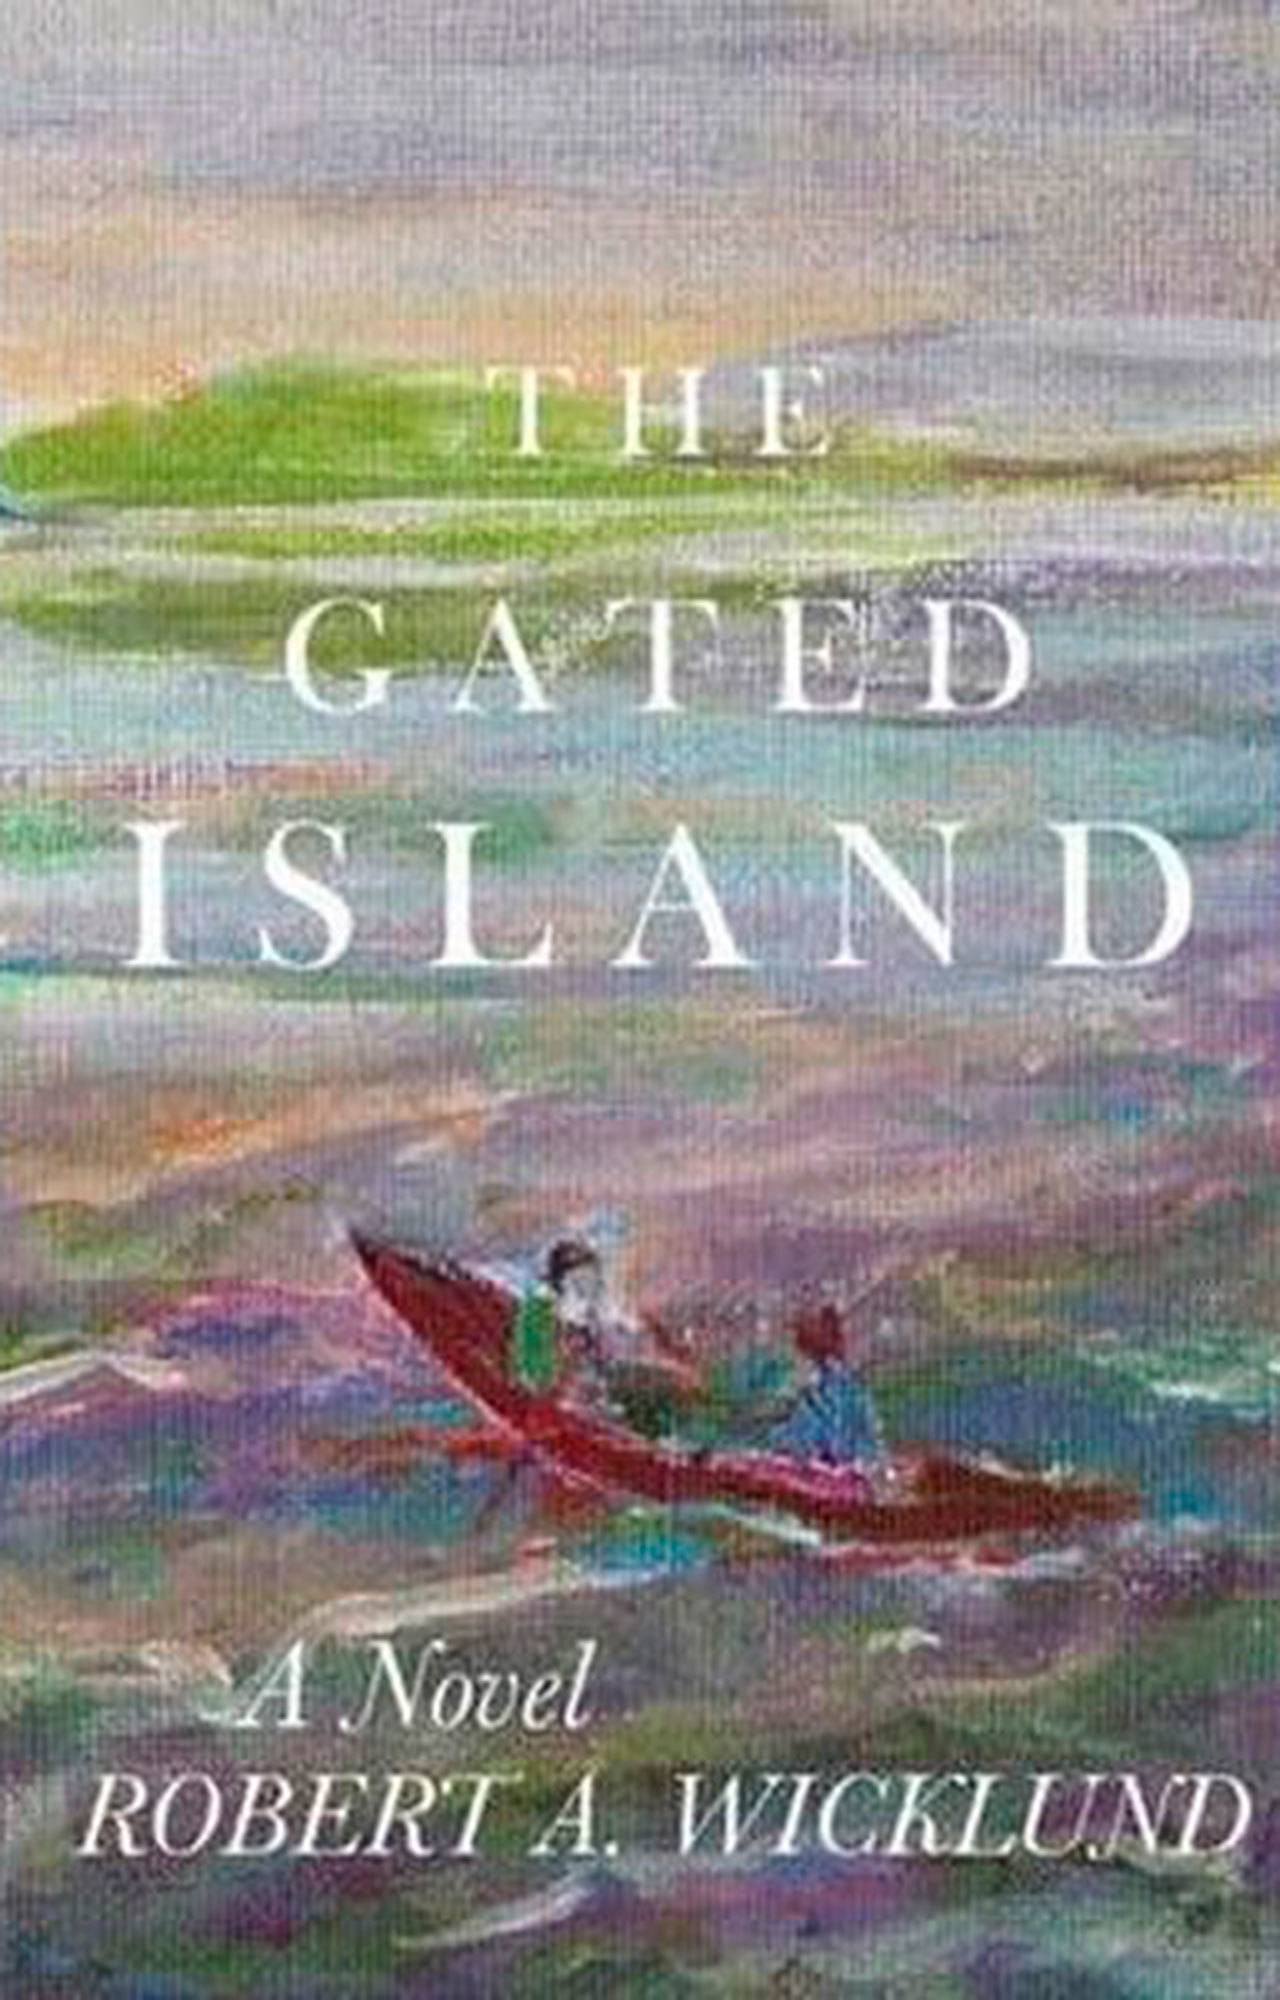 Image courtesy of Eagle Harbor Book Company                                Robert A. Wicklund will appear at Eagle Harbor Book at 7 p.m. Thursday, Jan. 12 to discuss his book “The Gated Island.”